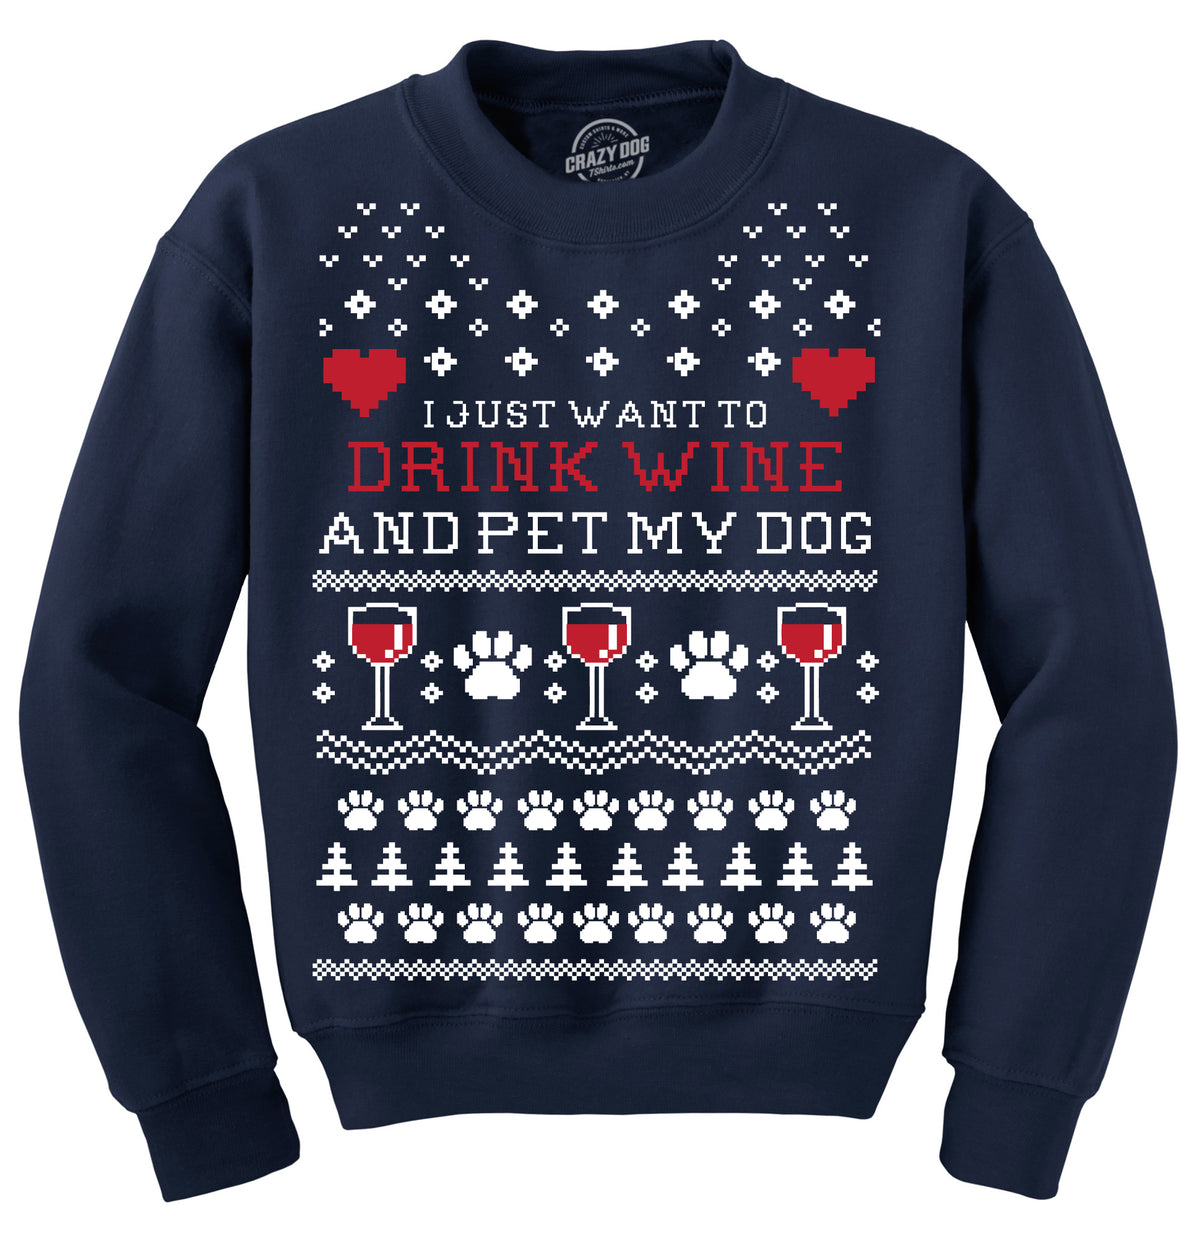 Funny Navy I Just Want To Drink Wine and Pet My Dog Sweatshirt Nerdy Christmas Dog Drinking Ugly Sweater Tee